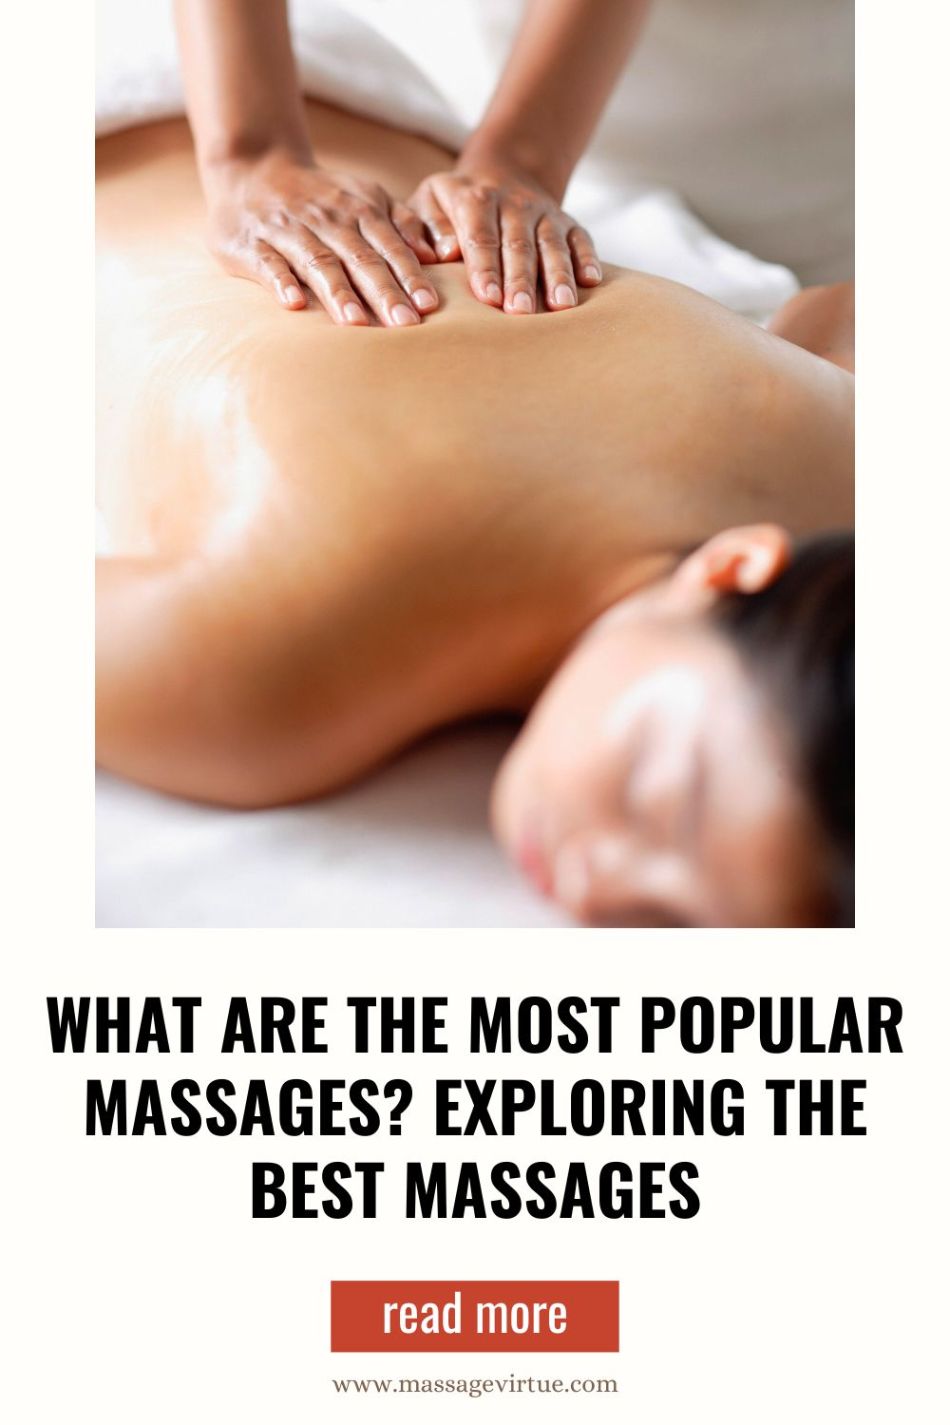 What Are the Most Popular Massages